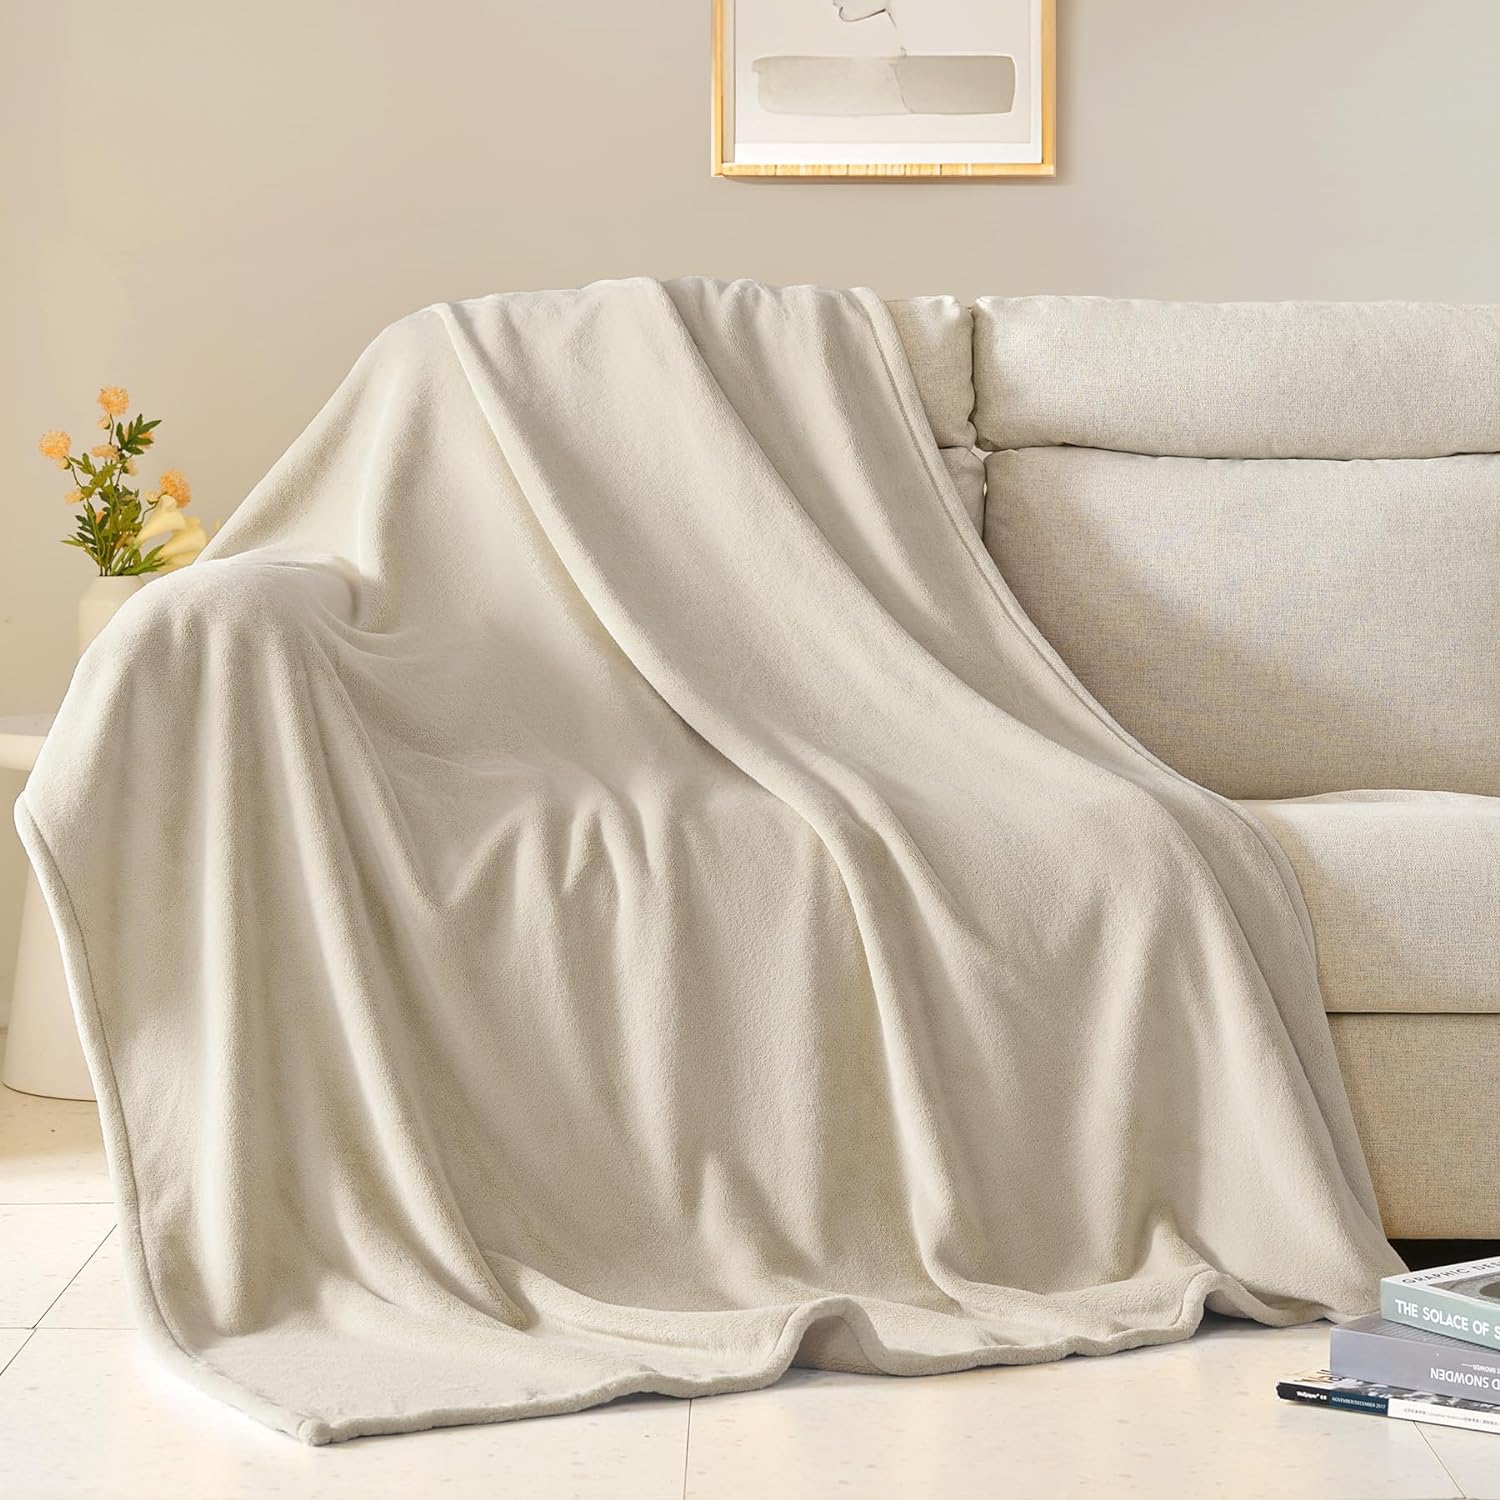 I recently purchased the BEAUTEX Fleece Blanket in Twin Size, and let me tell you, it has exceeded all my expectations! This grey blanket throw is an absolute game-changer in the world of comfort and coziness.First and foremost, the softness of this blanket is unparalleled. It' like wrapping yourself in a cloud of warmth and fuzziness. The super soft flannel material feels incredibly luxurious against the skin, making it perfect for those chilly nights when you just want to snuggle up on the co